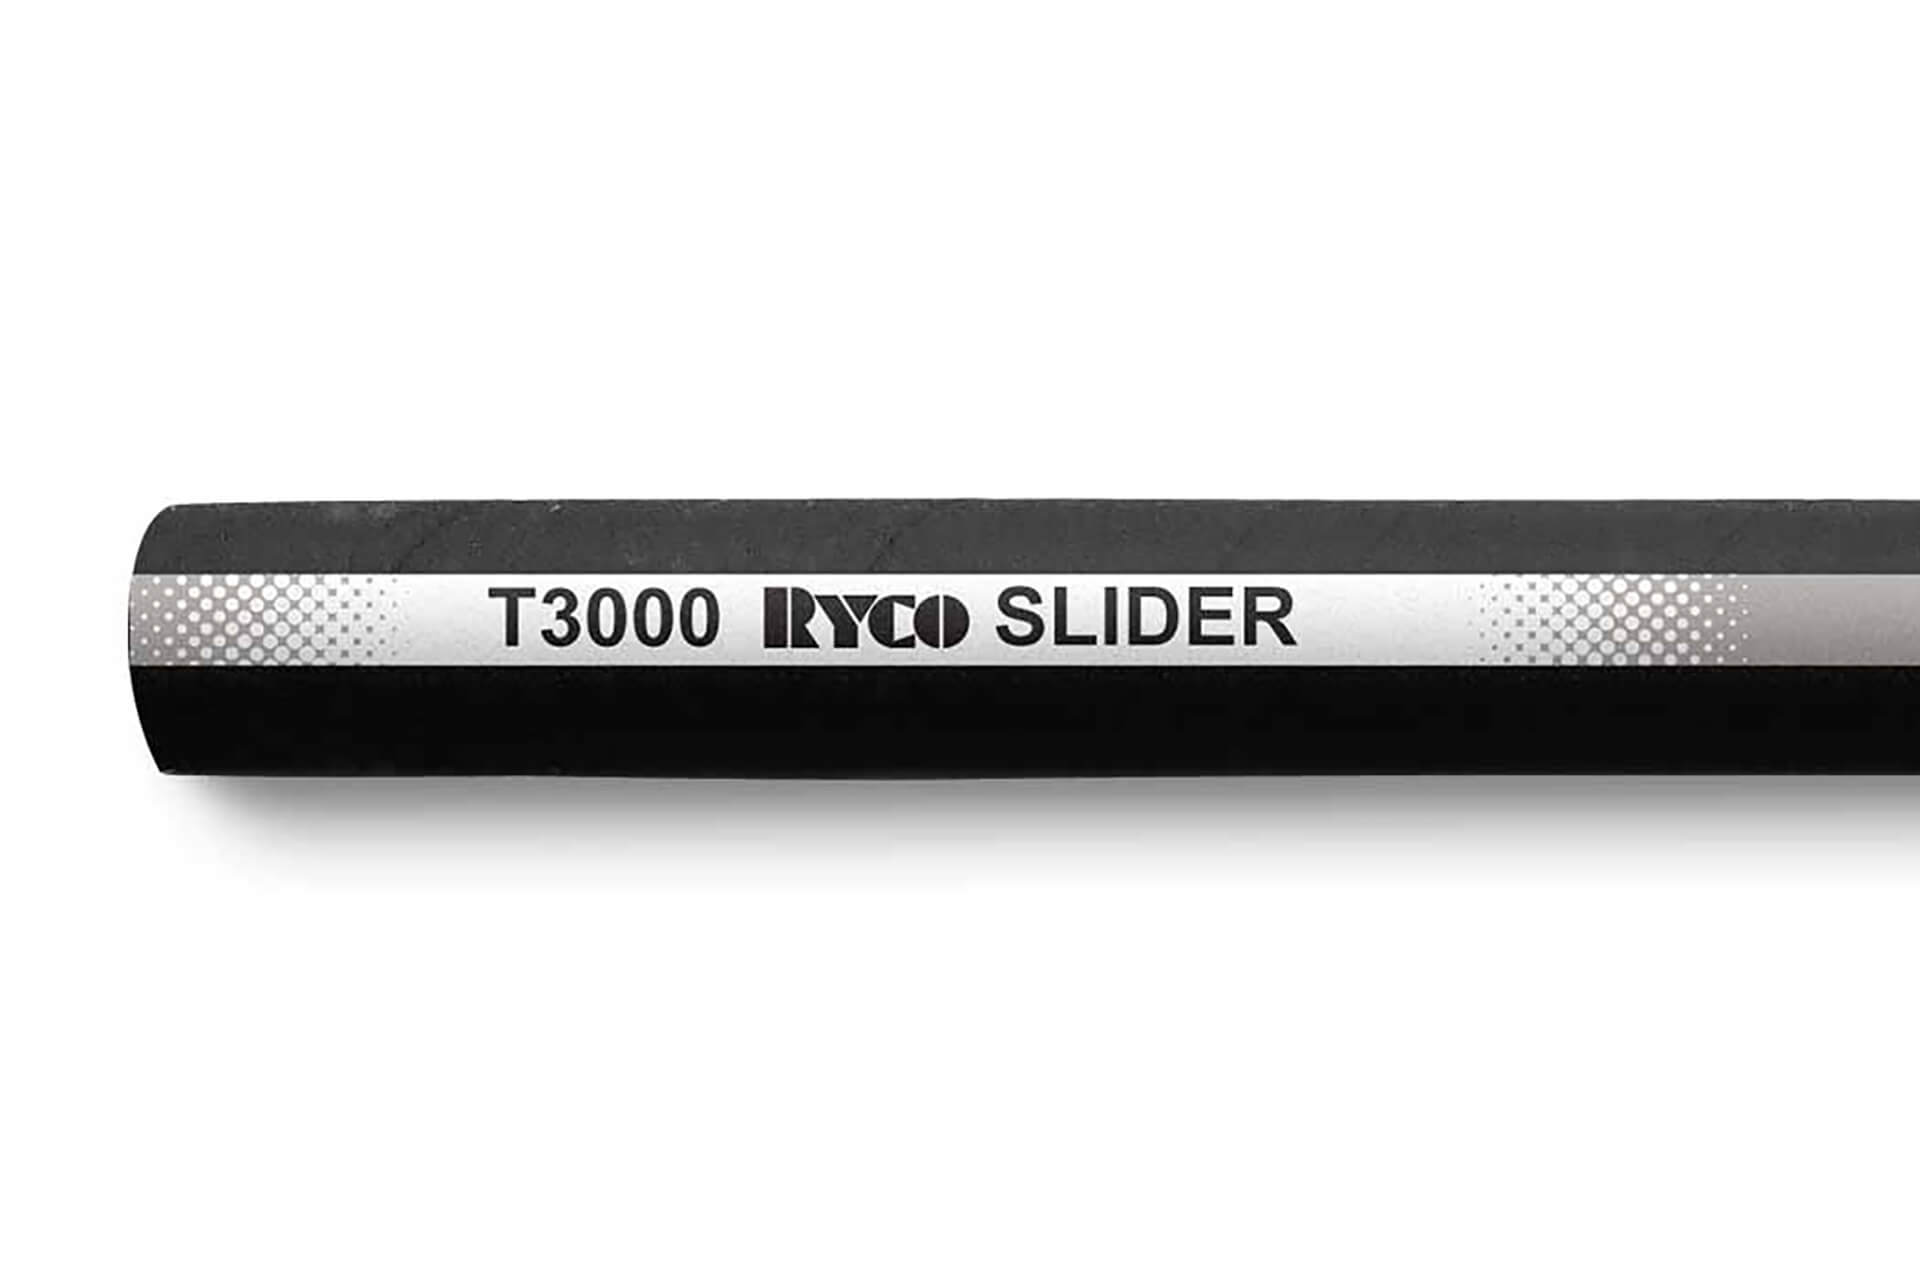 RYCO T3000 SERIES 3100 PSI ISOBARIC HOSE